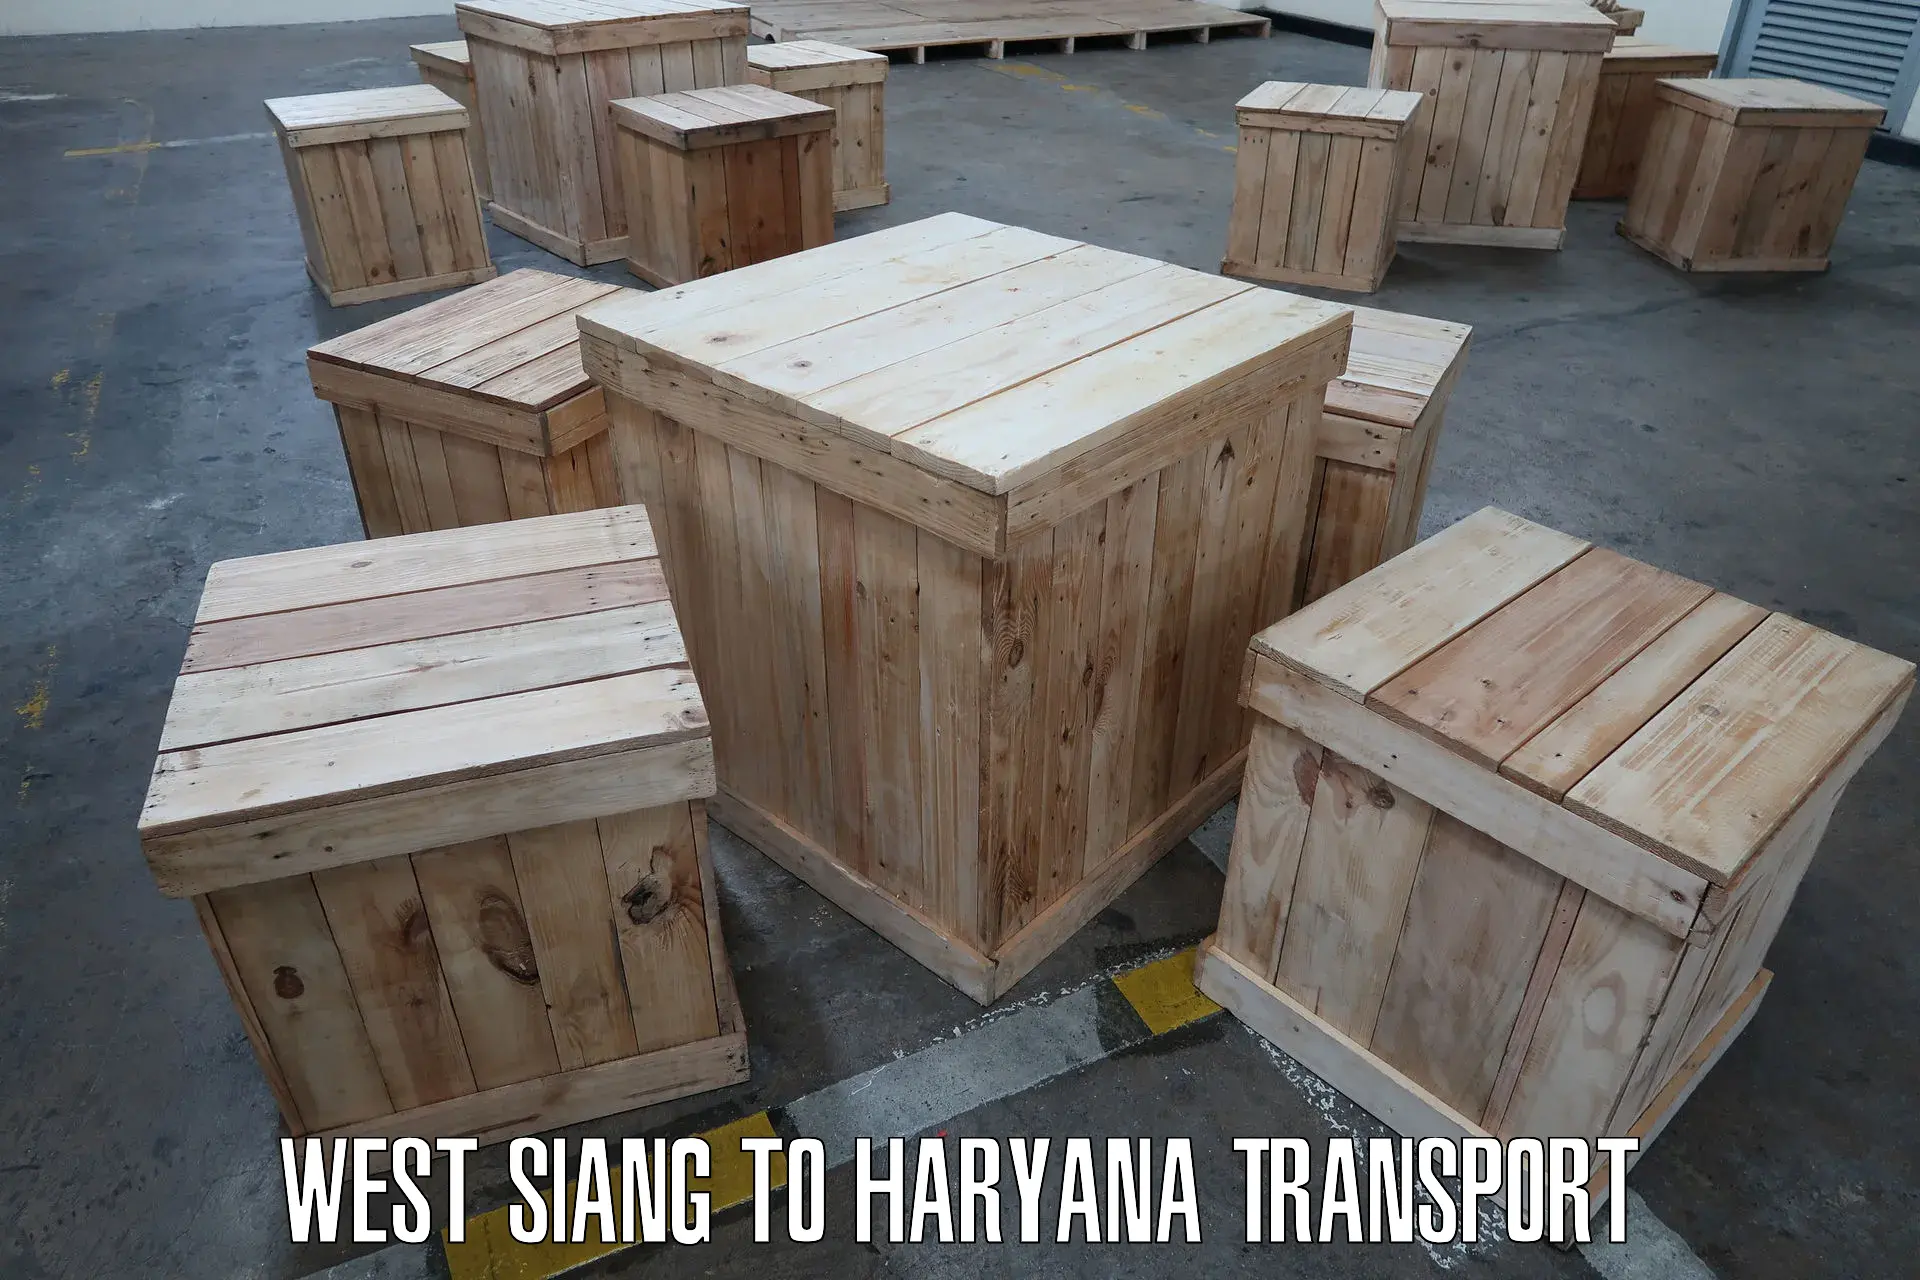 Online transport service West Siang to Haryana